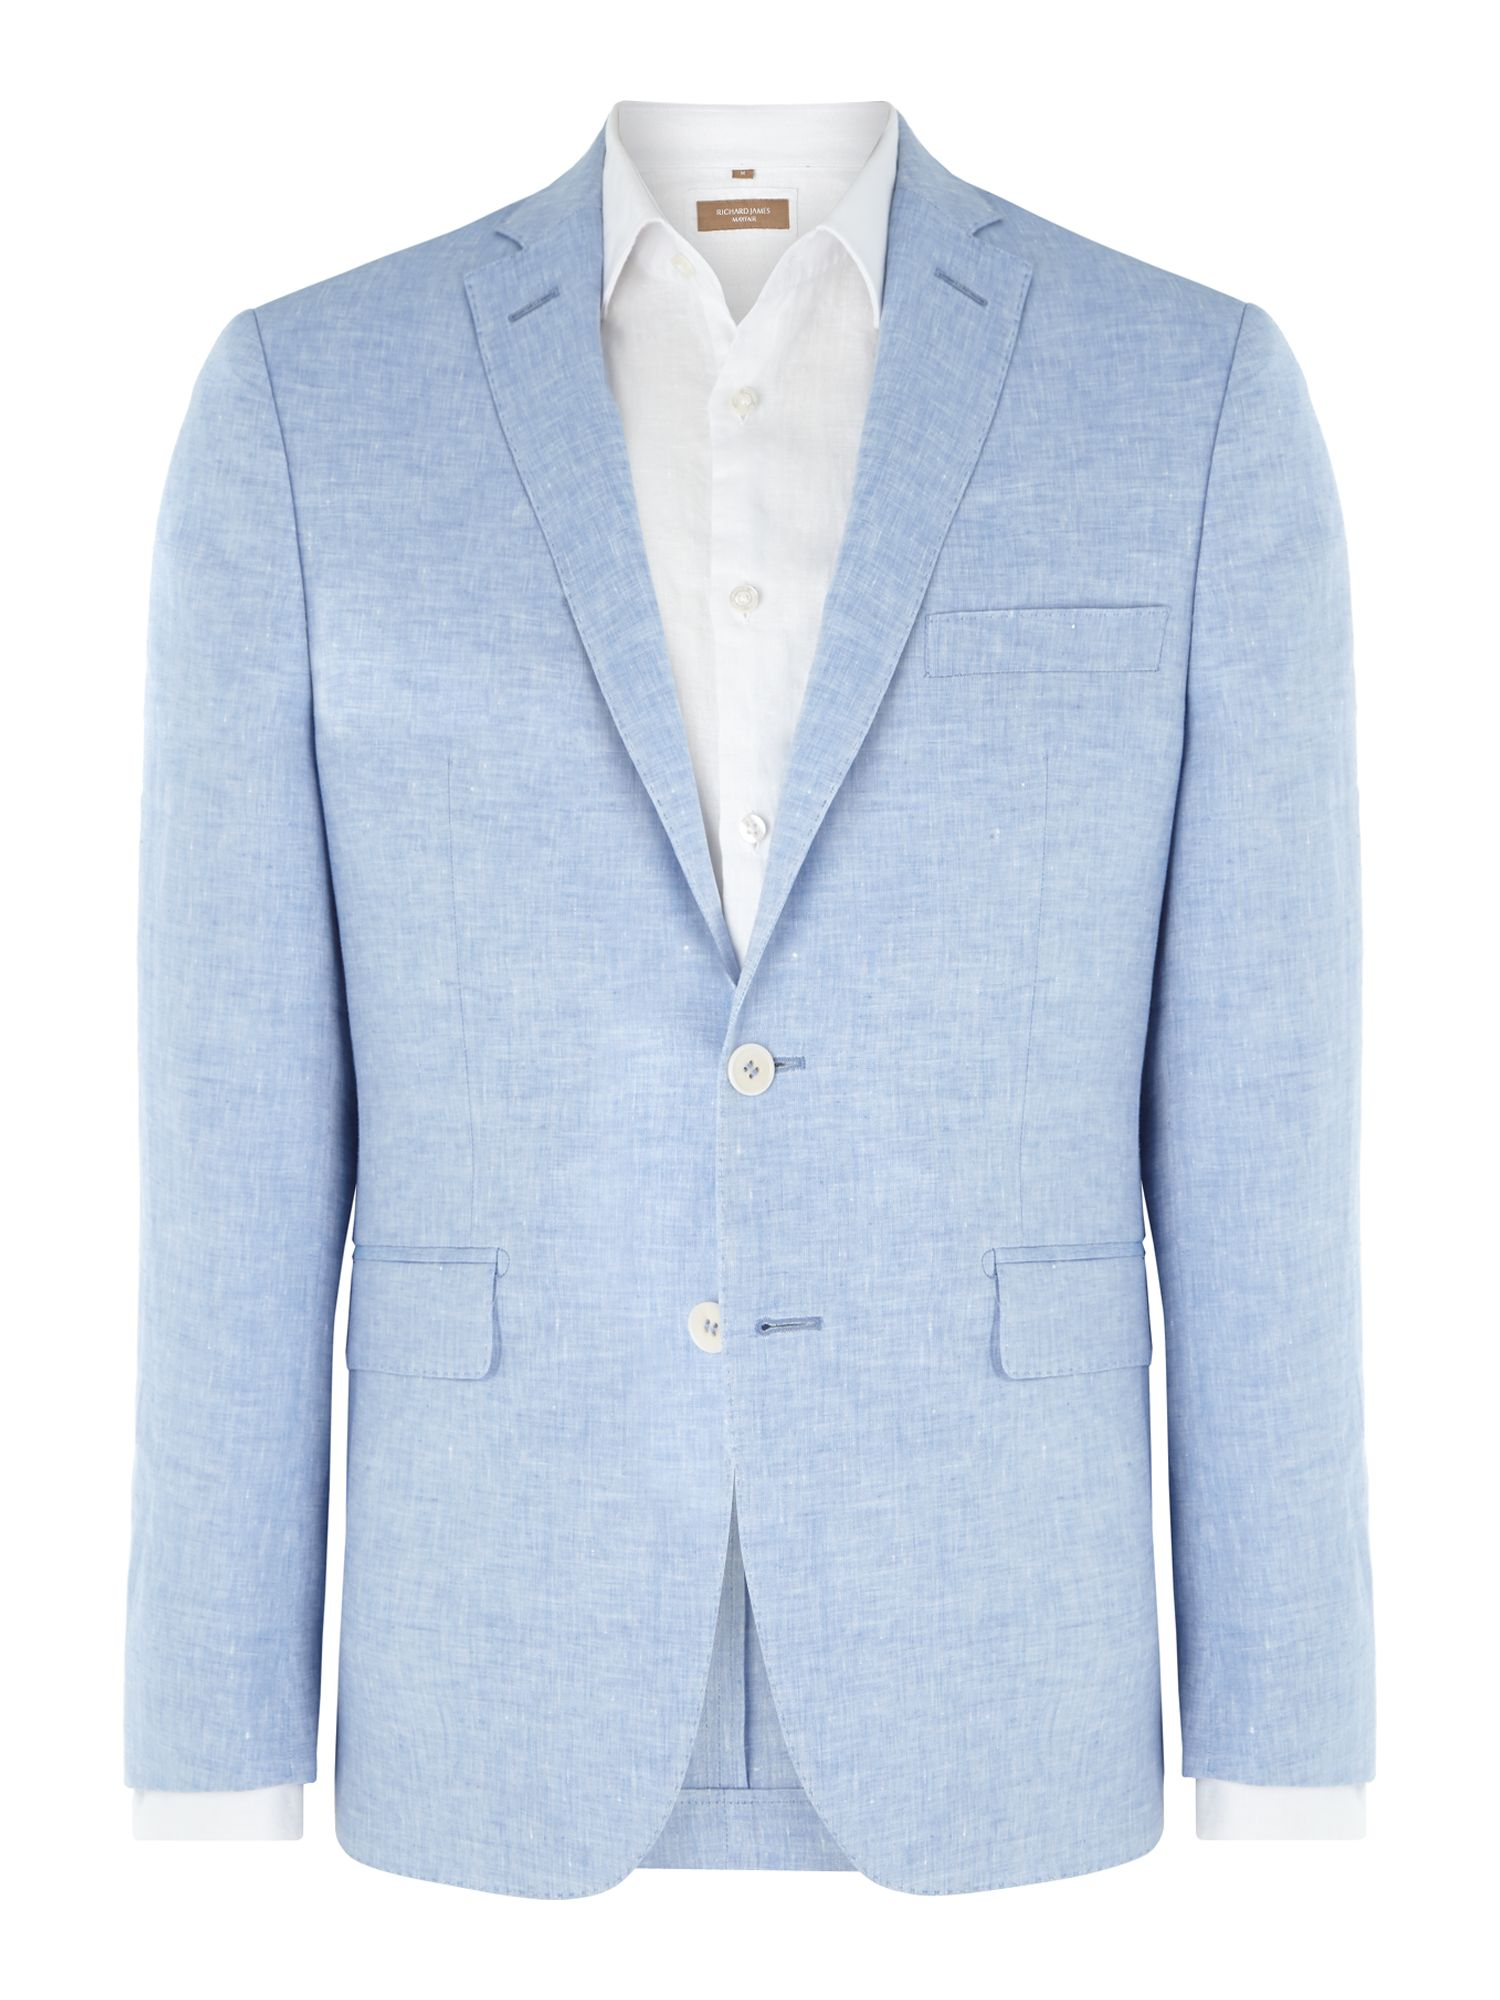 Richard james Contemporary Chambray Linen Jacket in Blue for Men (Sky ...